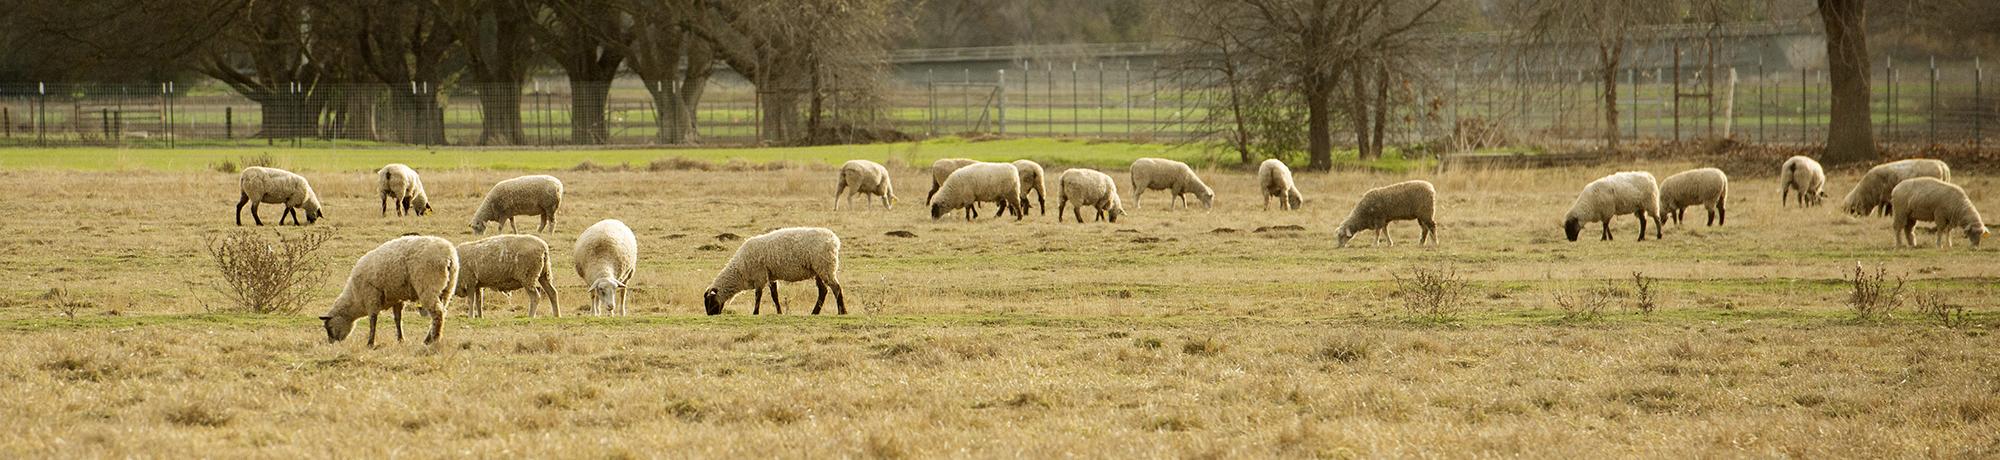 Image of sheep grazing on the UC Davis campus.